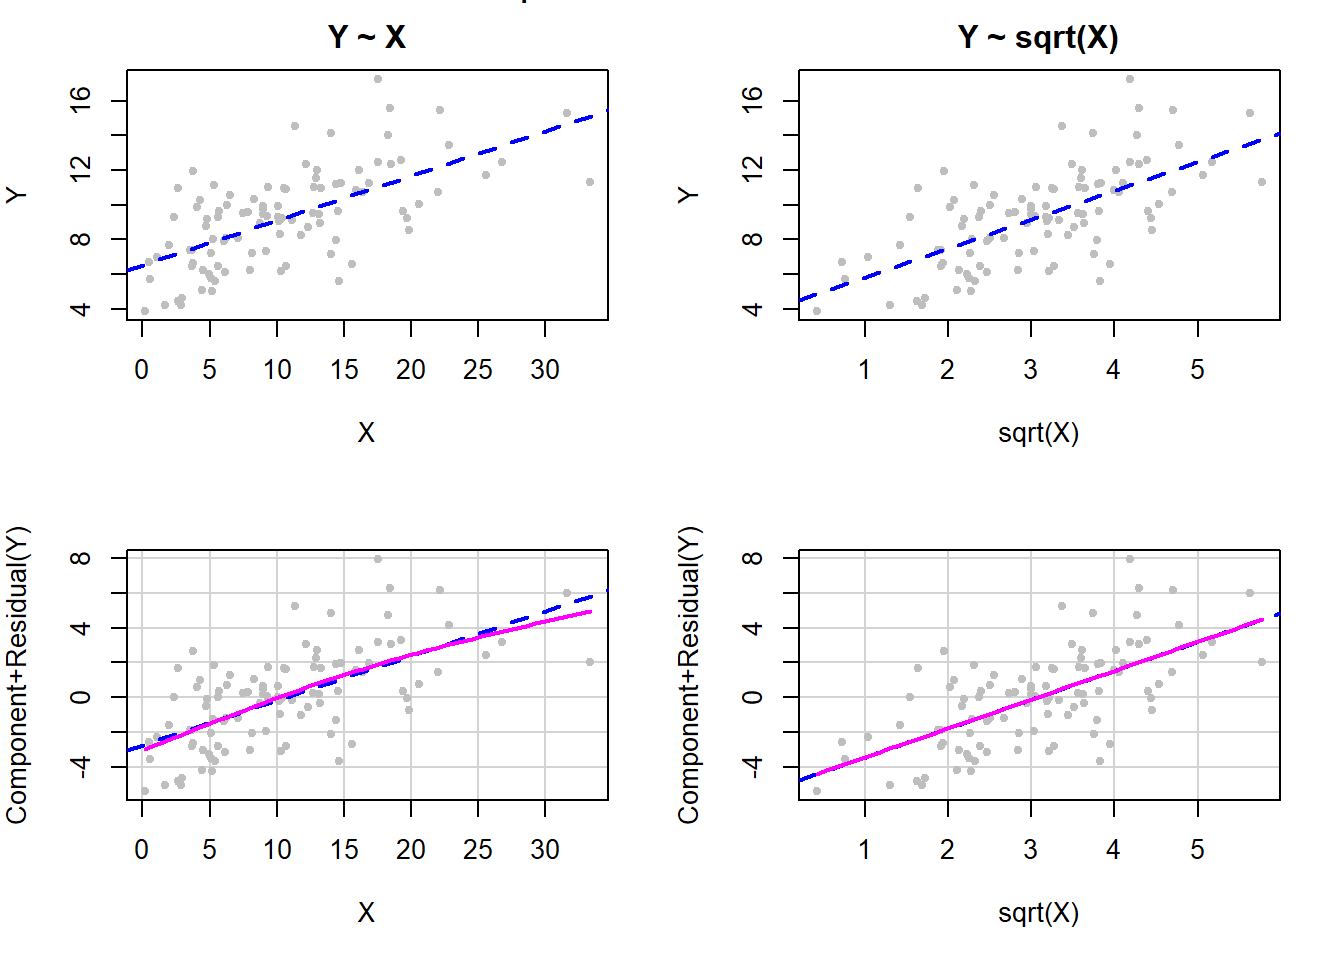 Square root-transformation of X to fix non-linearity